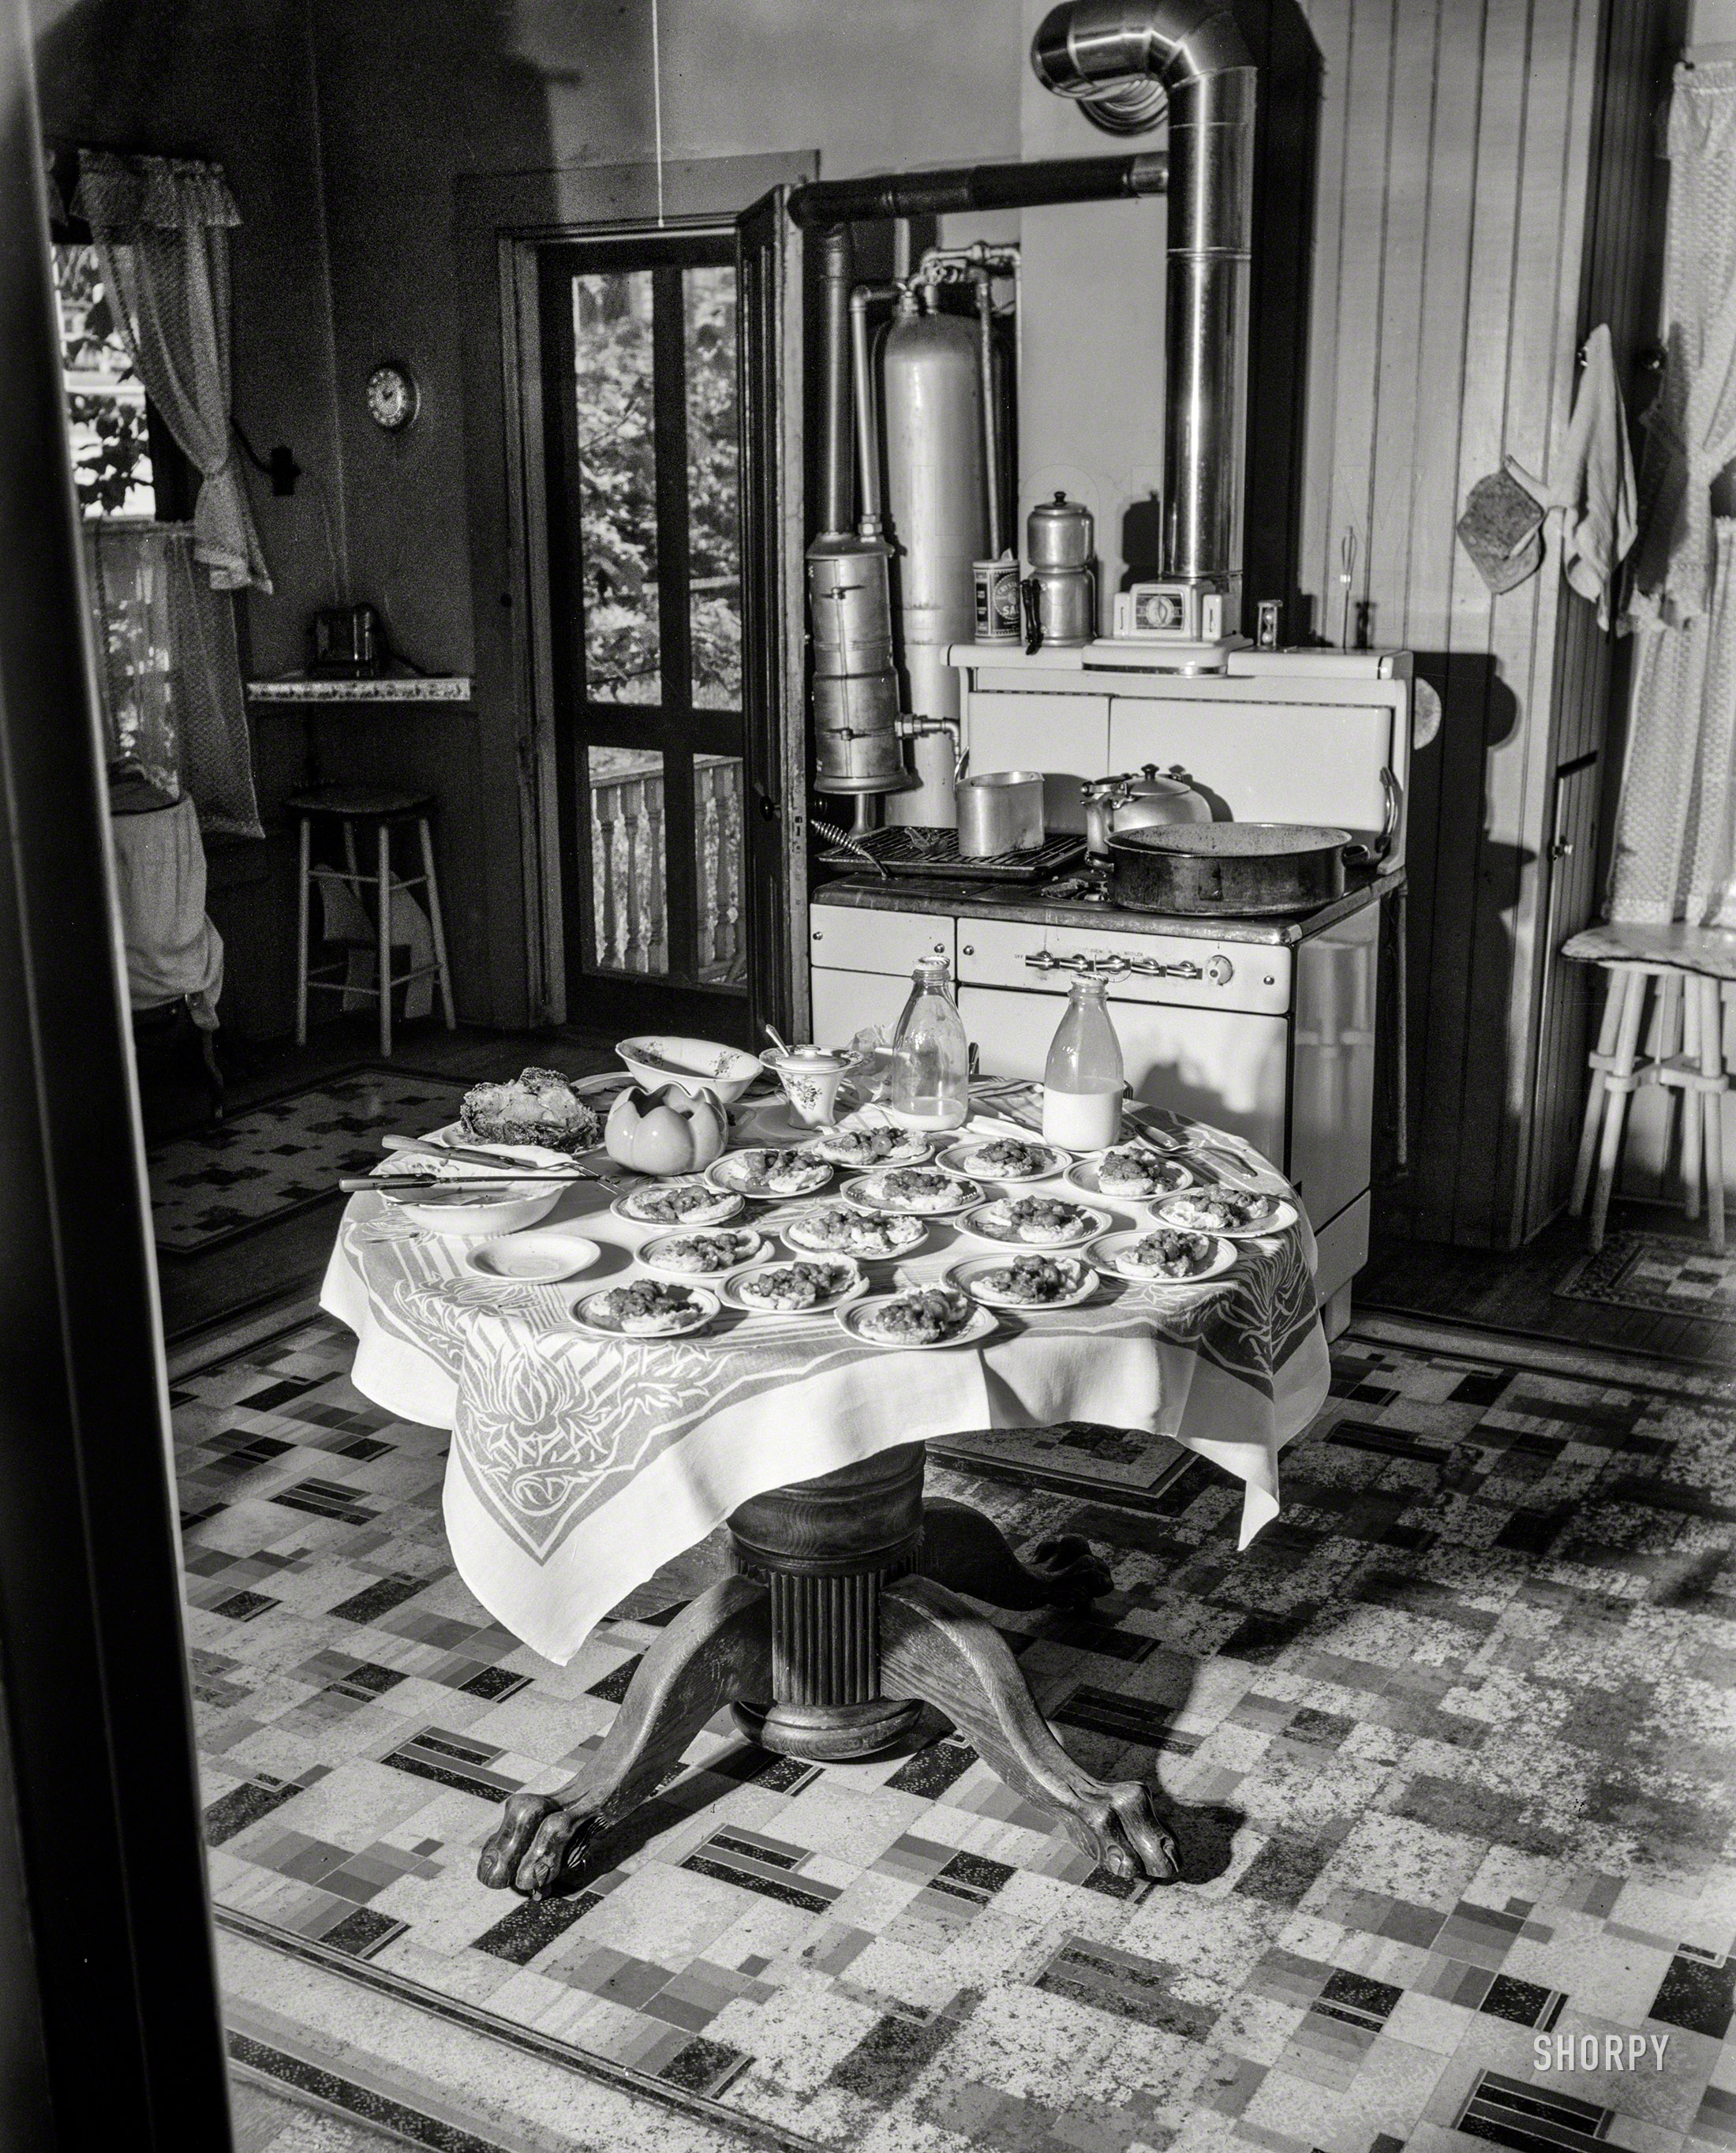 May 1942. "Southington, Connecticut. Preparations for Ralph Hurlbut's family dinner." Photo by Fenno Jacobs, Office of War Information. View full size.